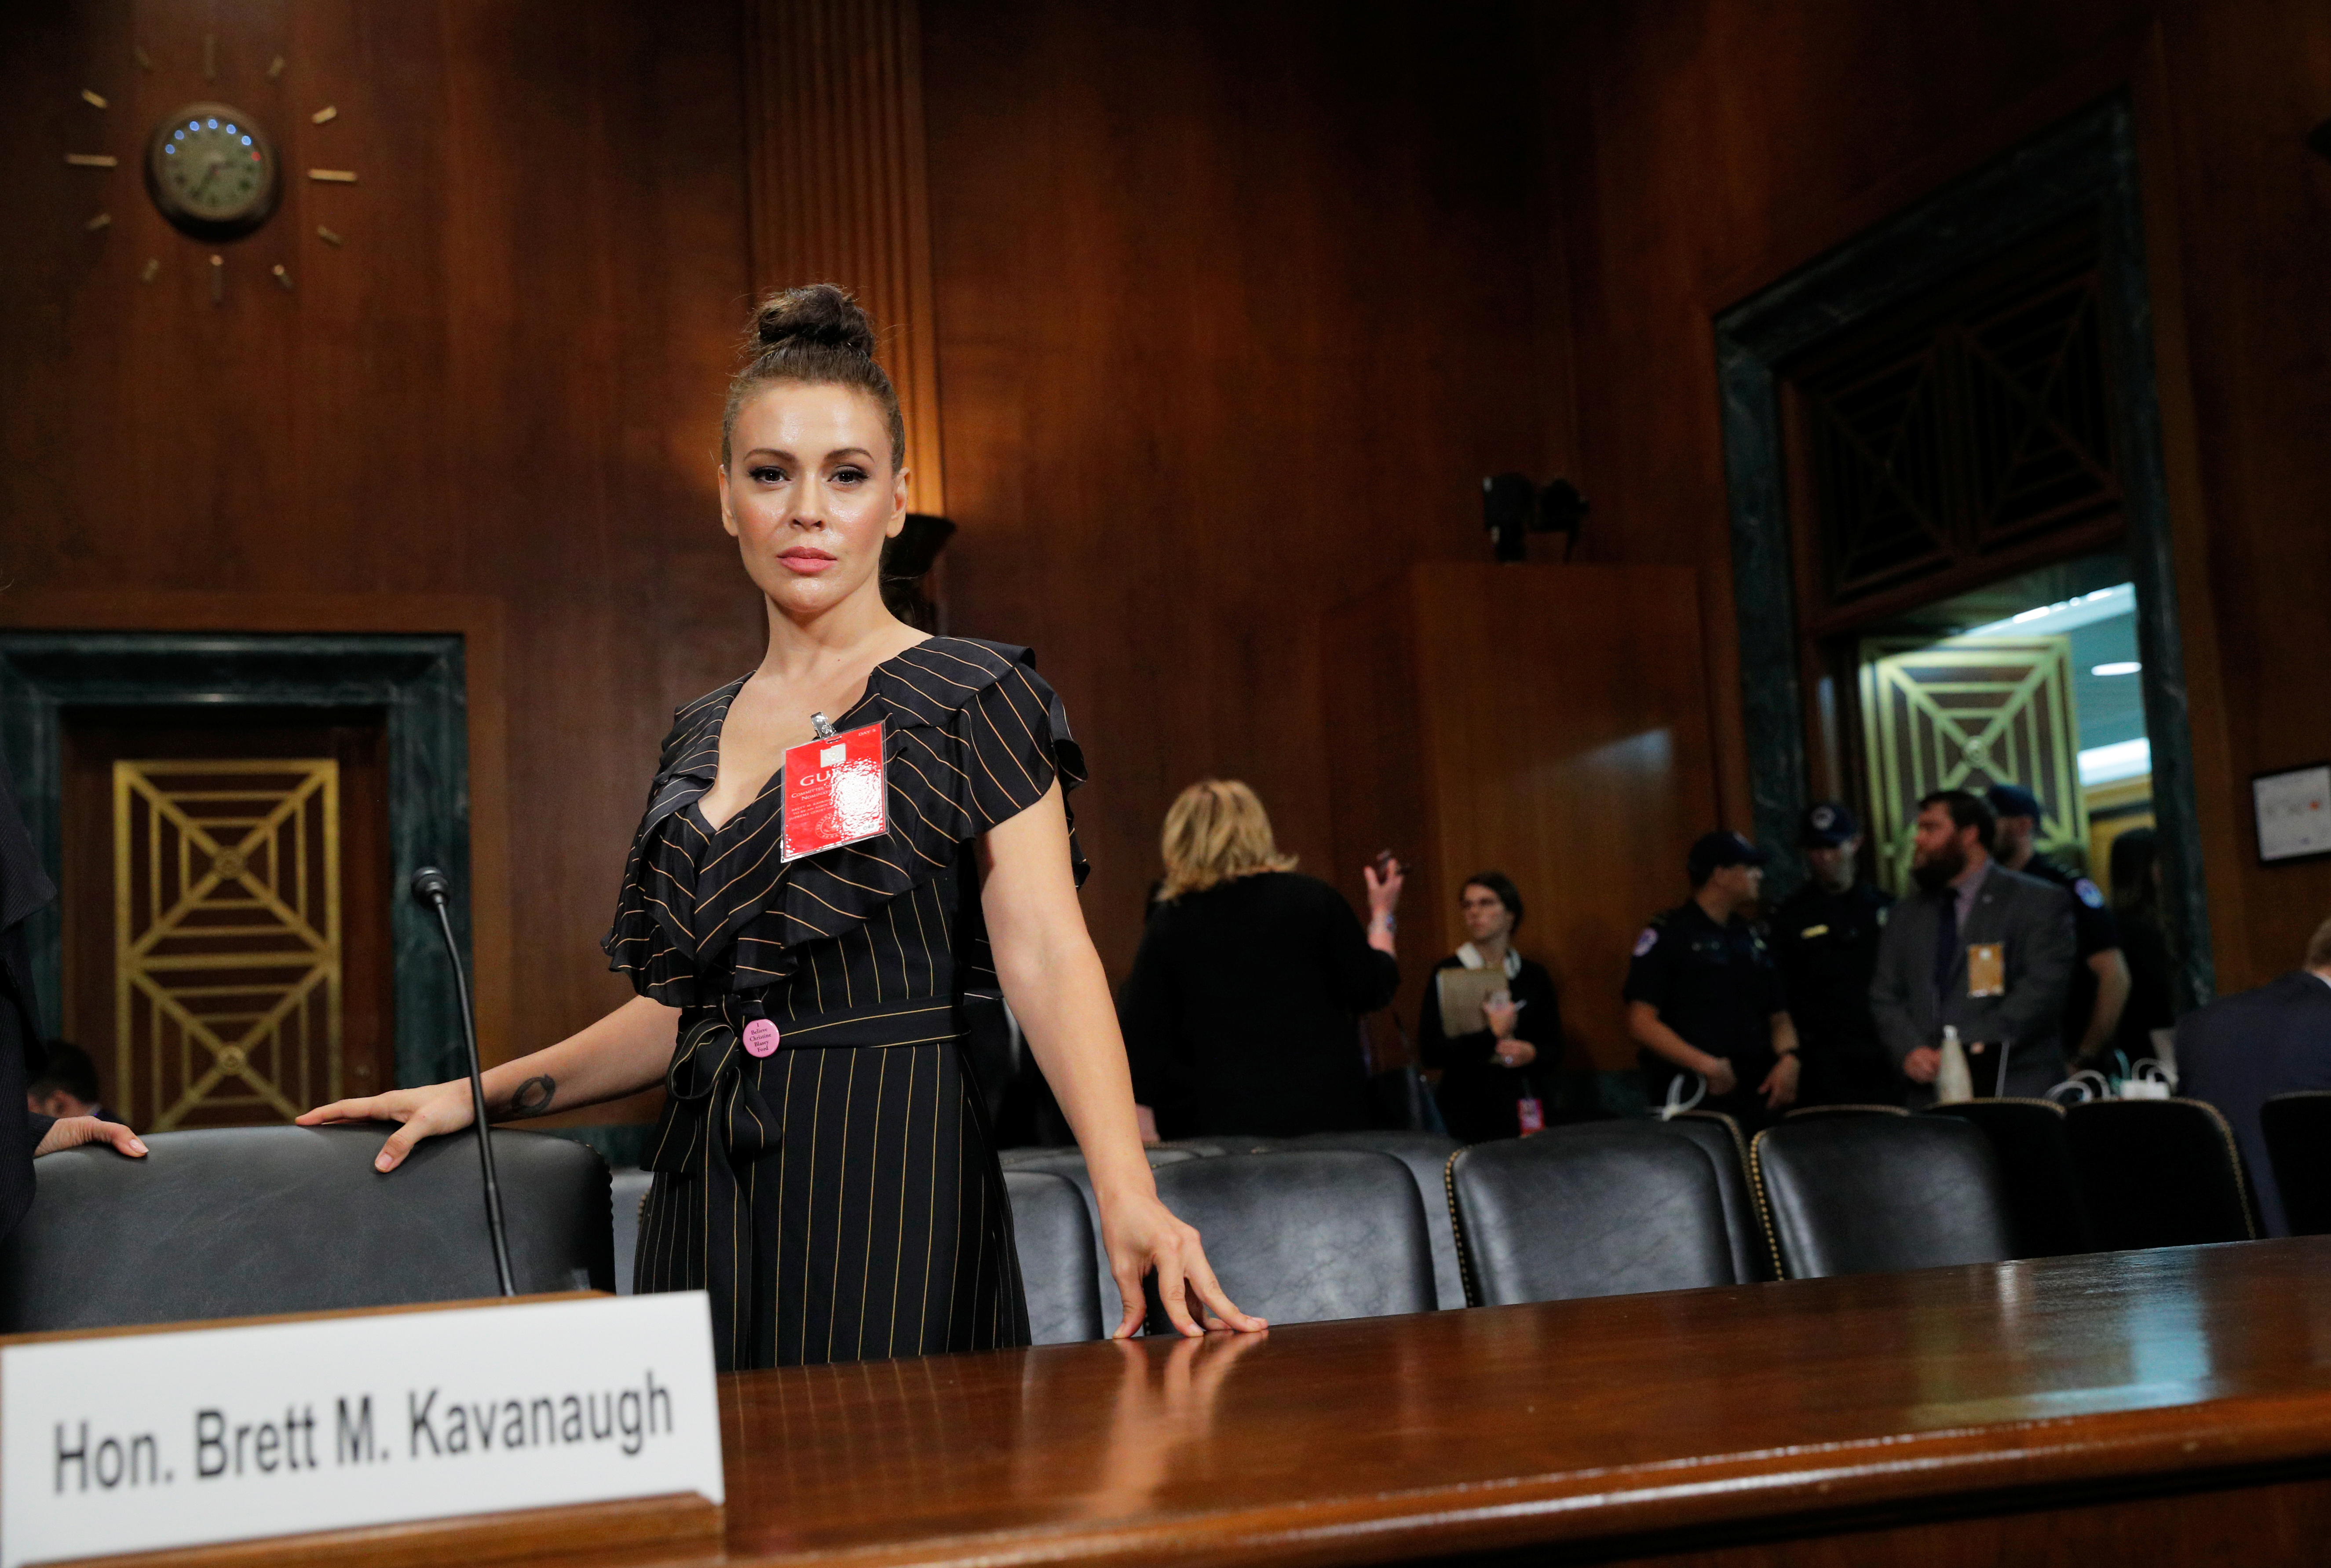 Actor Alyssa Milano stands in the hearing room after the conclusion of testimony before a Senate Judiciary Committee confirmation hearing for Kavanaugh by Professor Christine Blasey Ford, who has accused U.S. Supreme Court nominee Brett Kavanaugh of a sexual assault in 1982, on Capitol Hill in Washington, U.S., September 27, 2018. REUTERS/Jim Bourg 